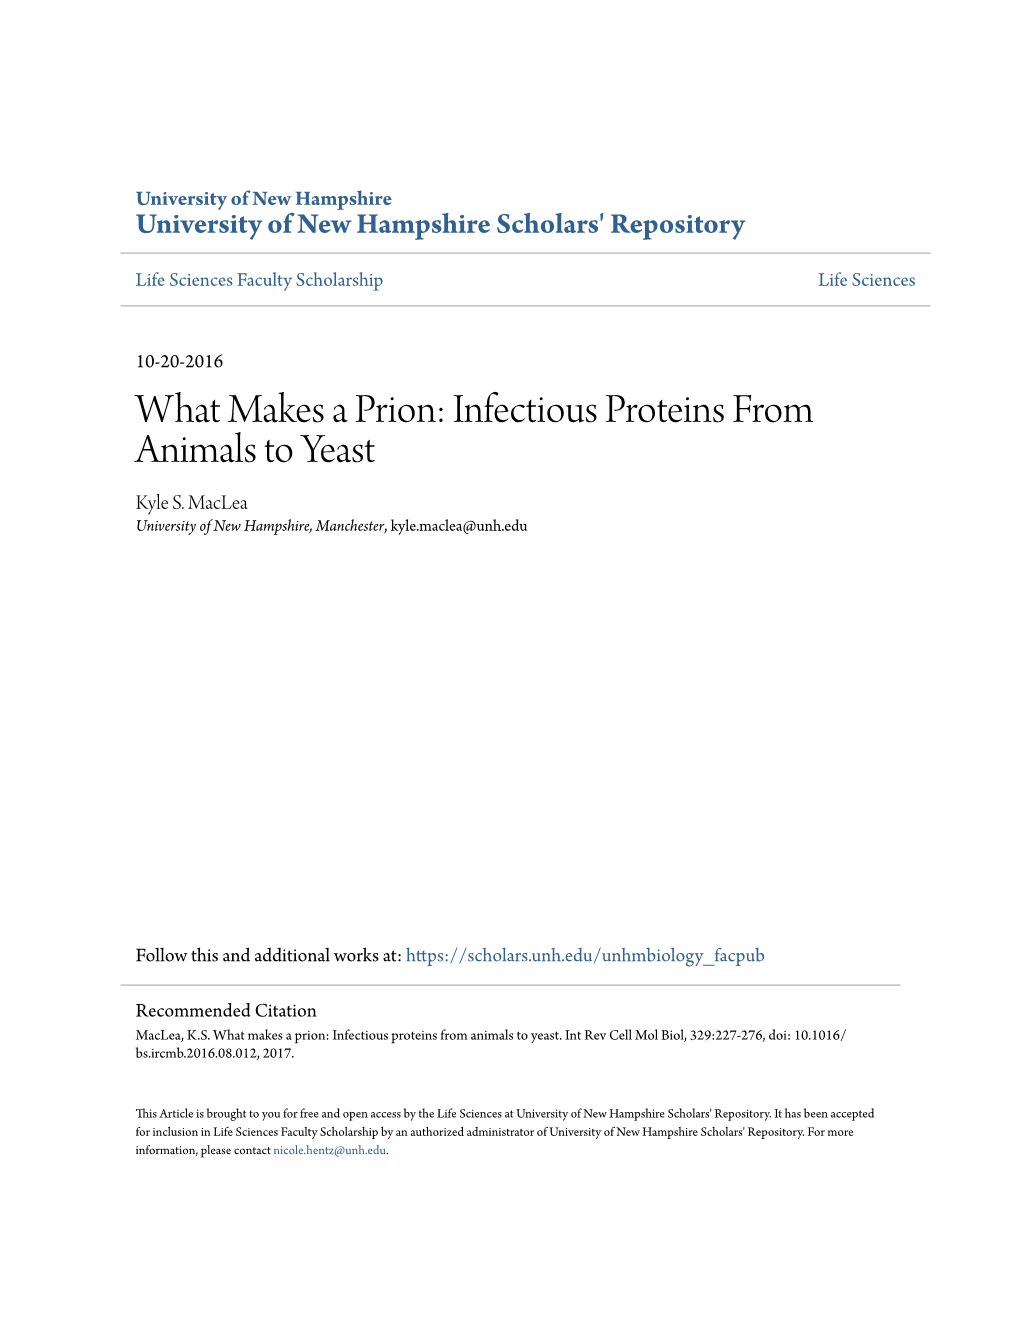 What Makes a Prion: Infectious Proteins from Animals to Yeast Kyle S